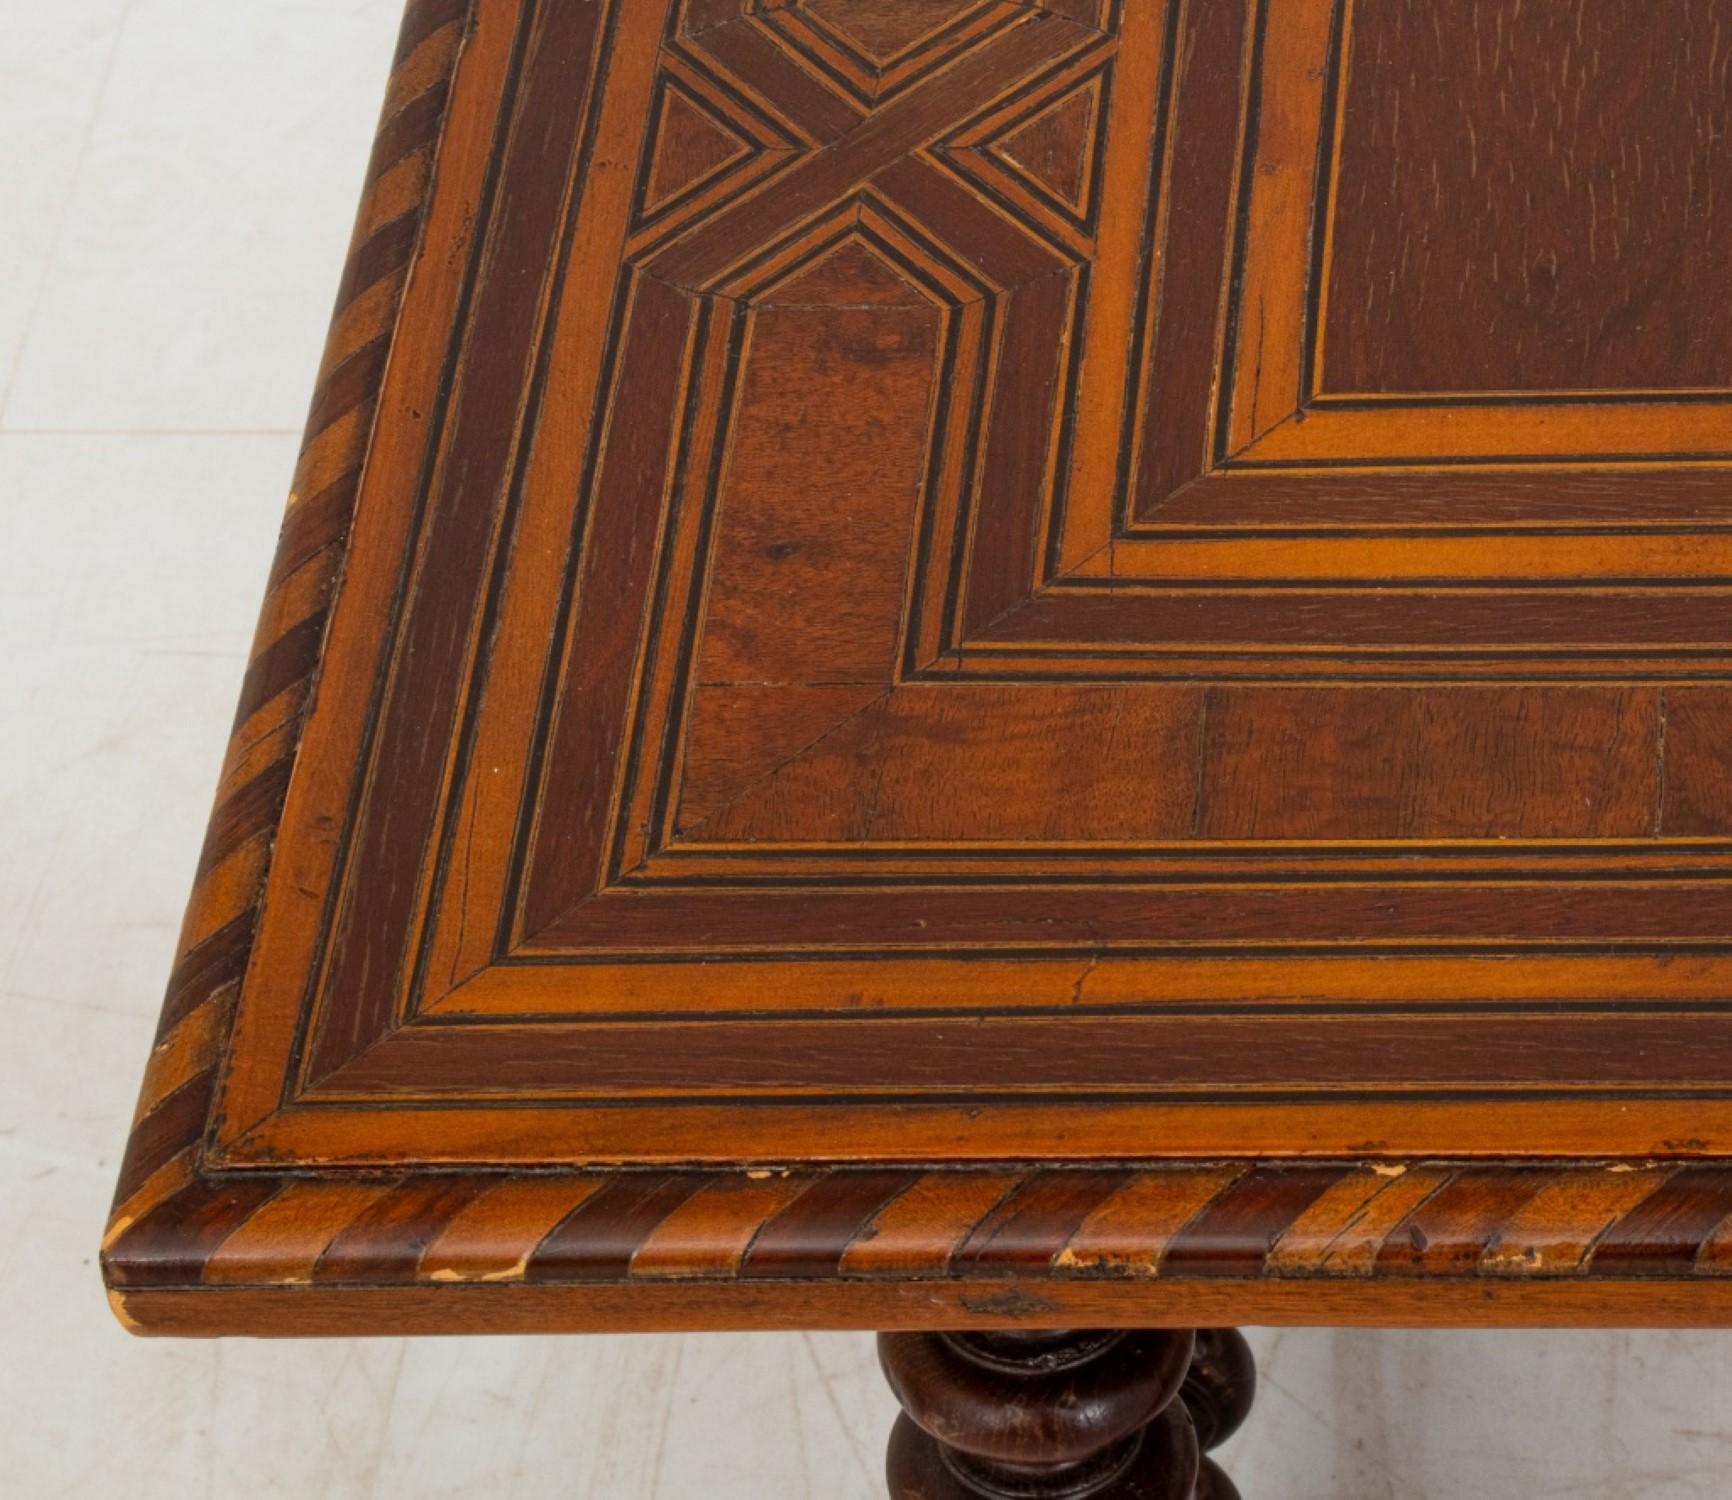 Wood Spanish Baroque Style Parquetry Low Table, 20th C.